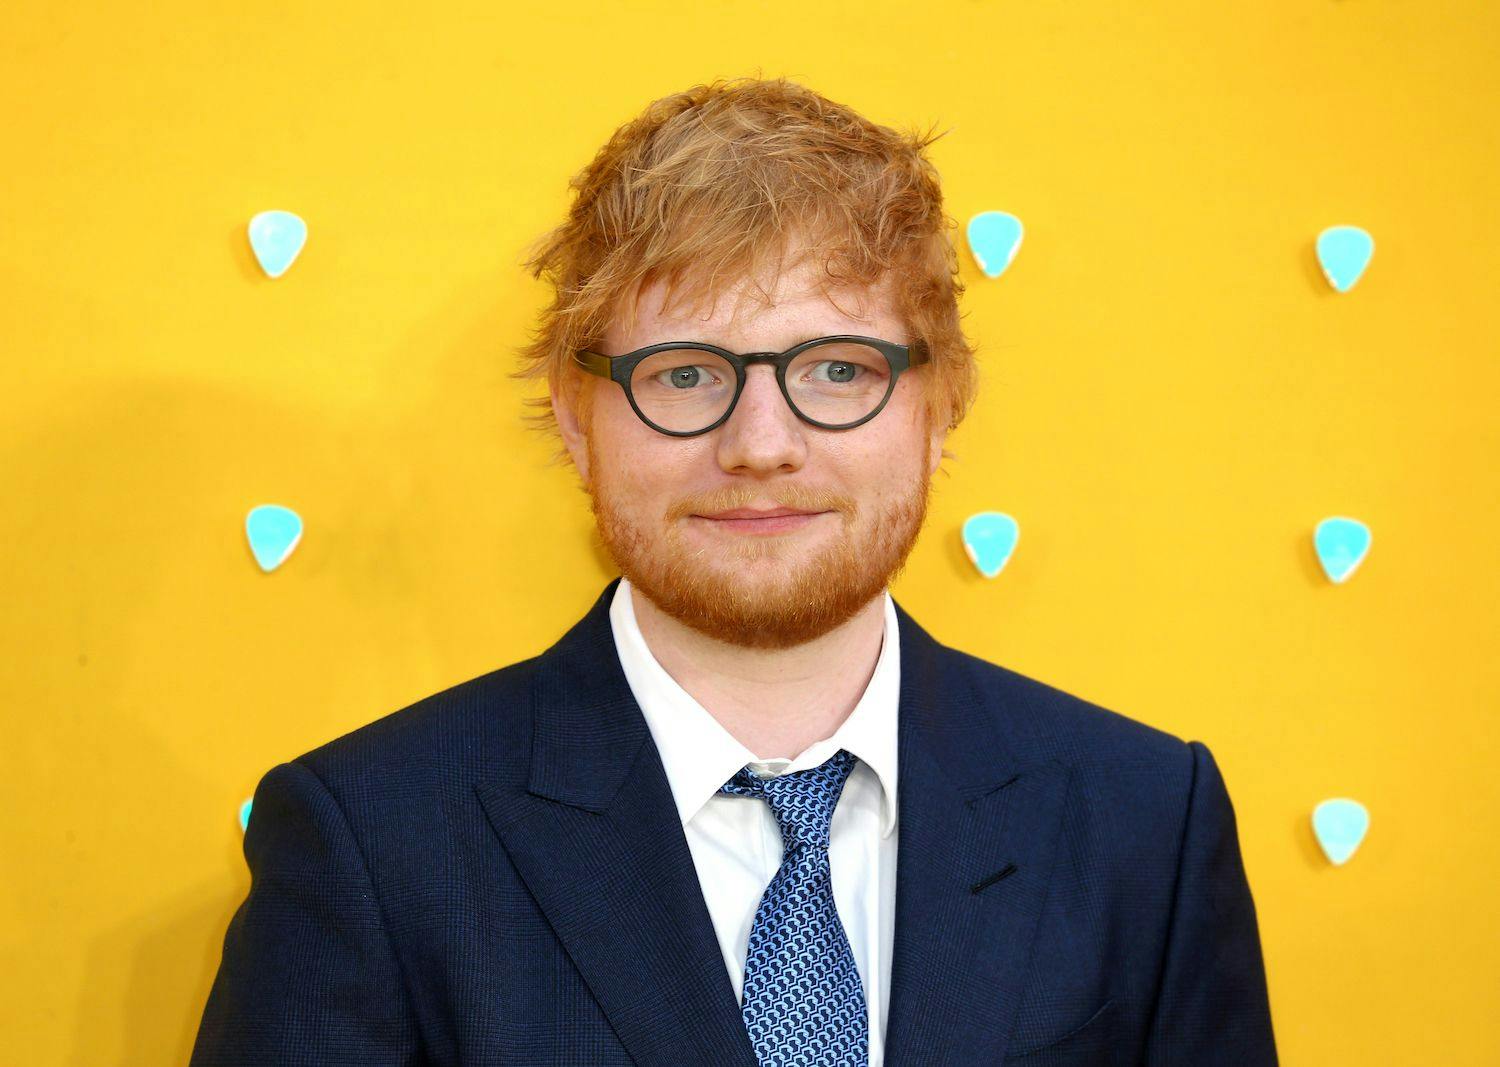 What can we learn from Ed Sheeran’s documentary, ‘The Sum of It All’?